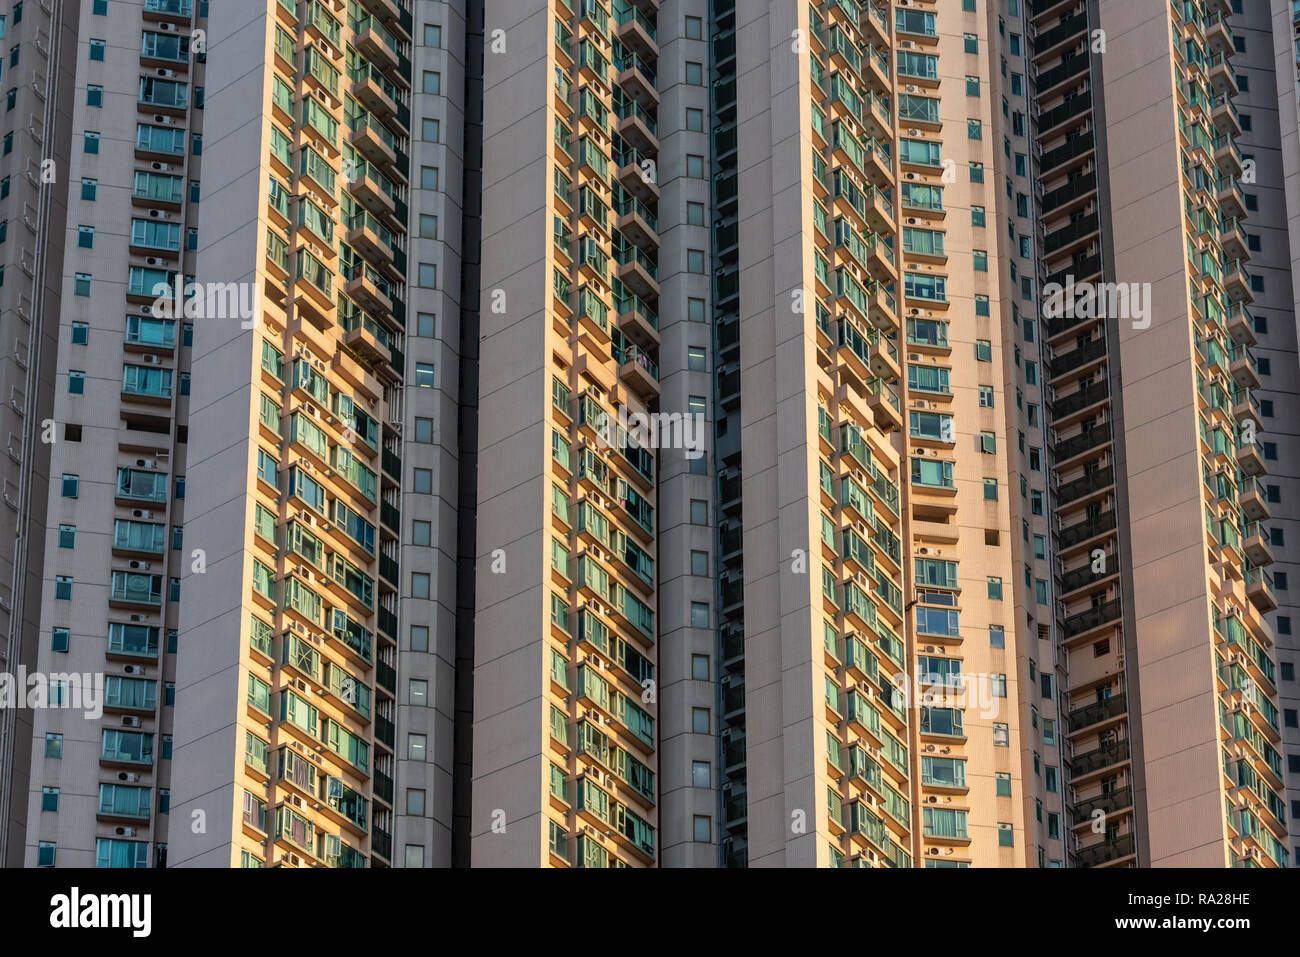 The seemingly endless wall of humanity that form the Victoria Towers high rise residential development on Canton Road in Tsim Sha Tsui, Hong Kong Stock Photo